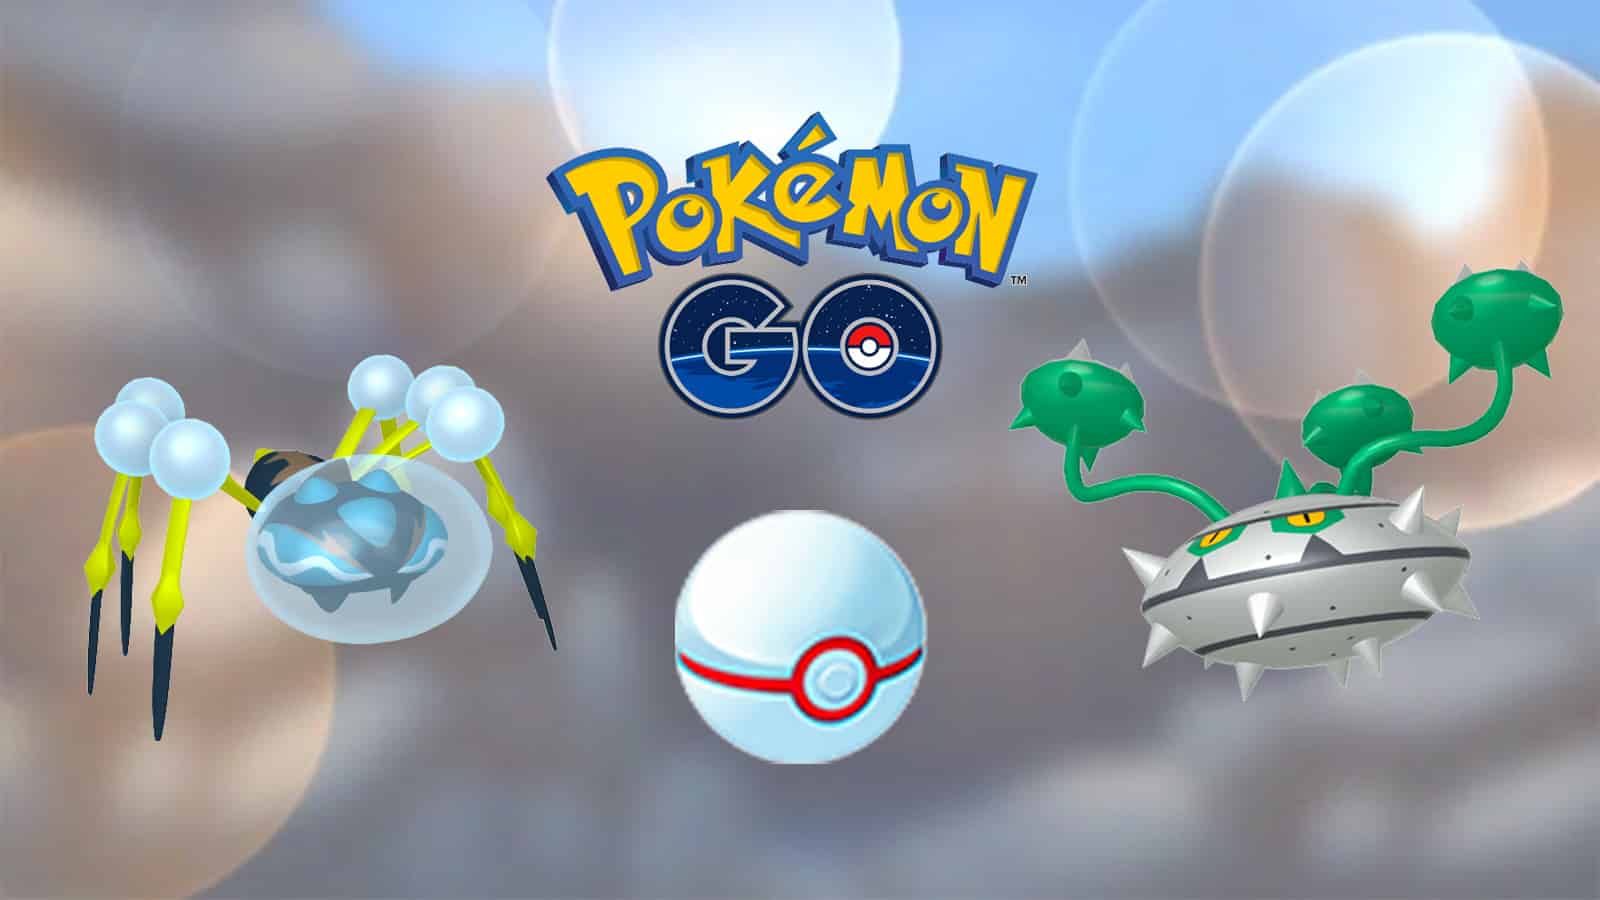 Pokémon Go's February event line-up makes for its busiest month ever